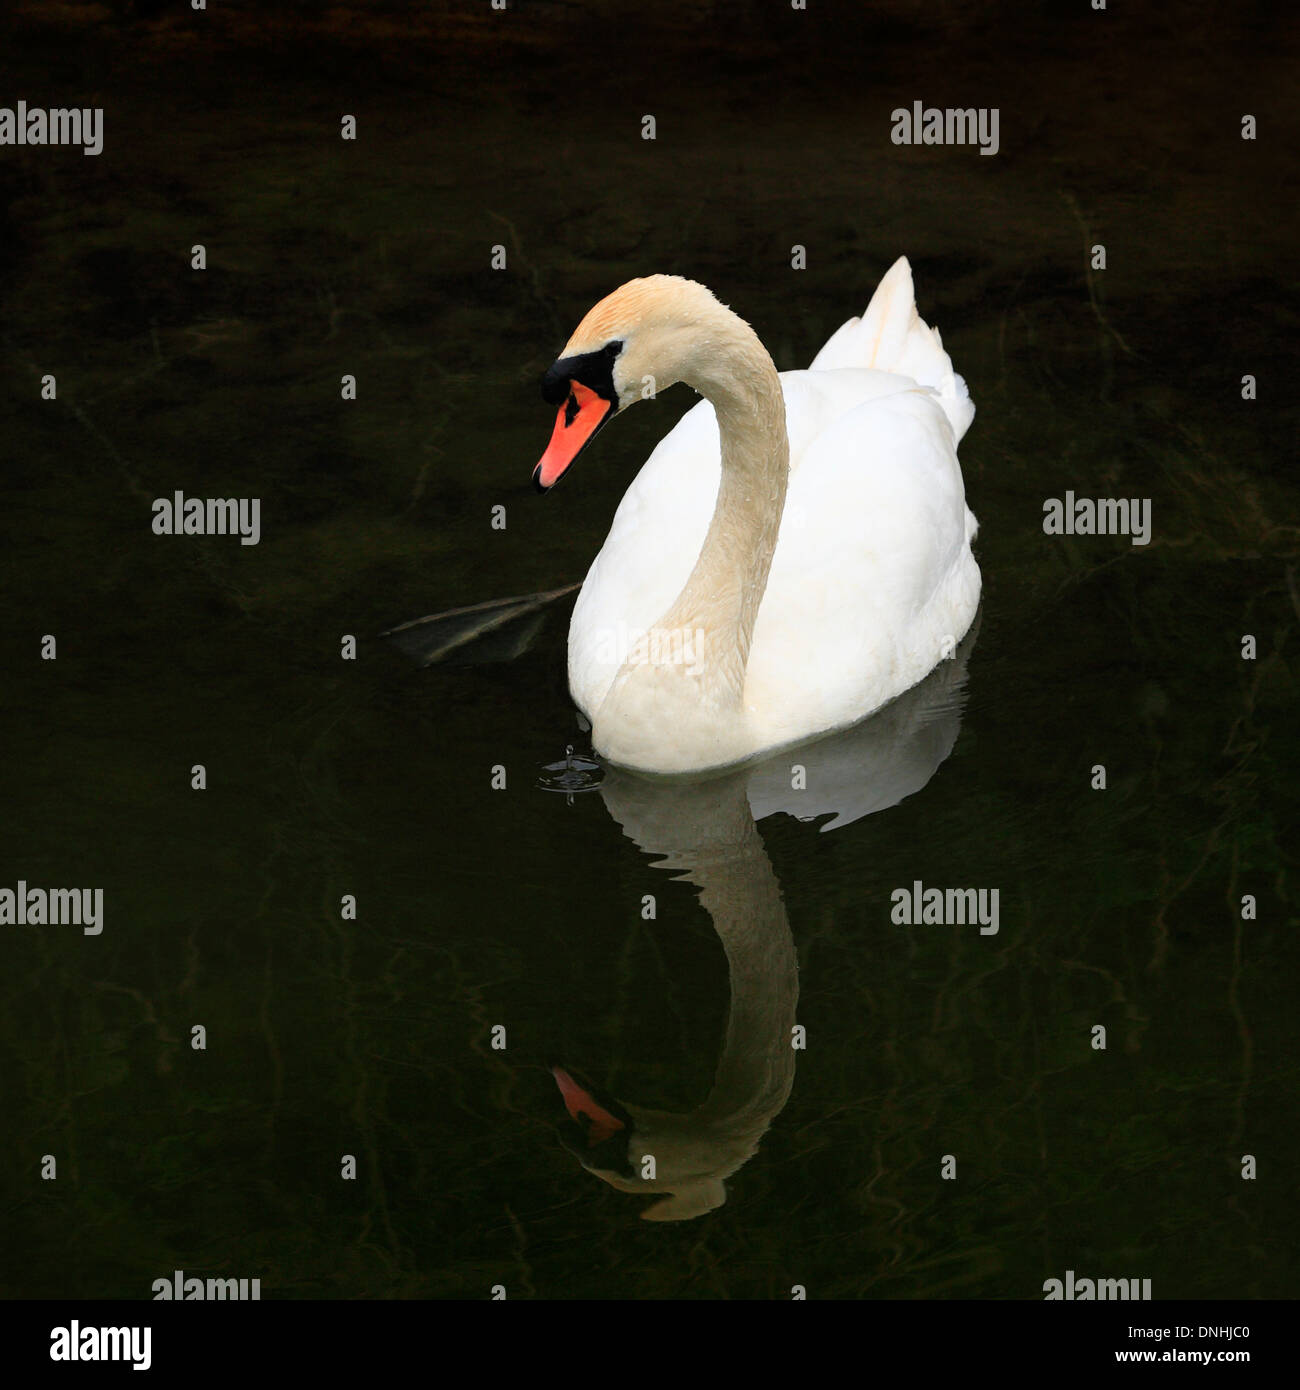 Mute swan on dark ground with a water droplet dripping down into the water. Stock Photo